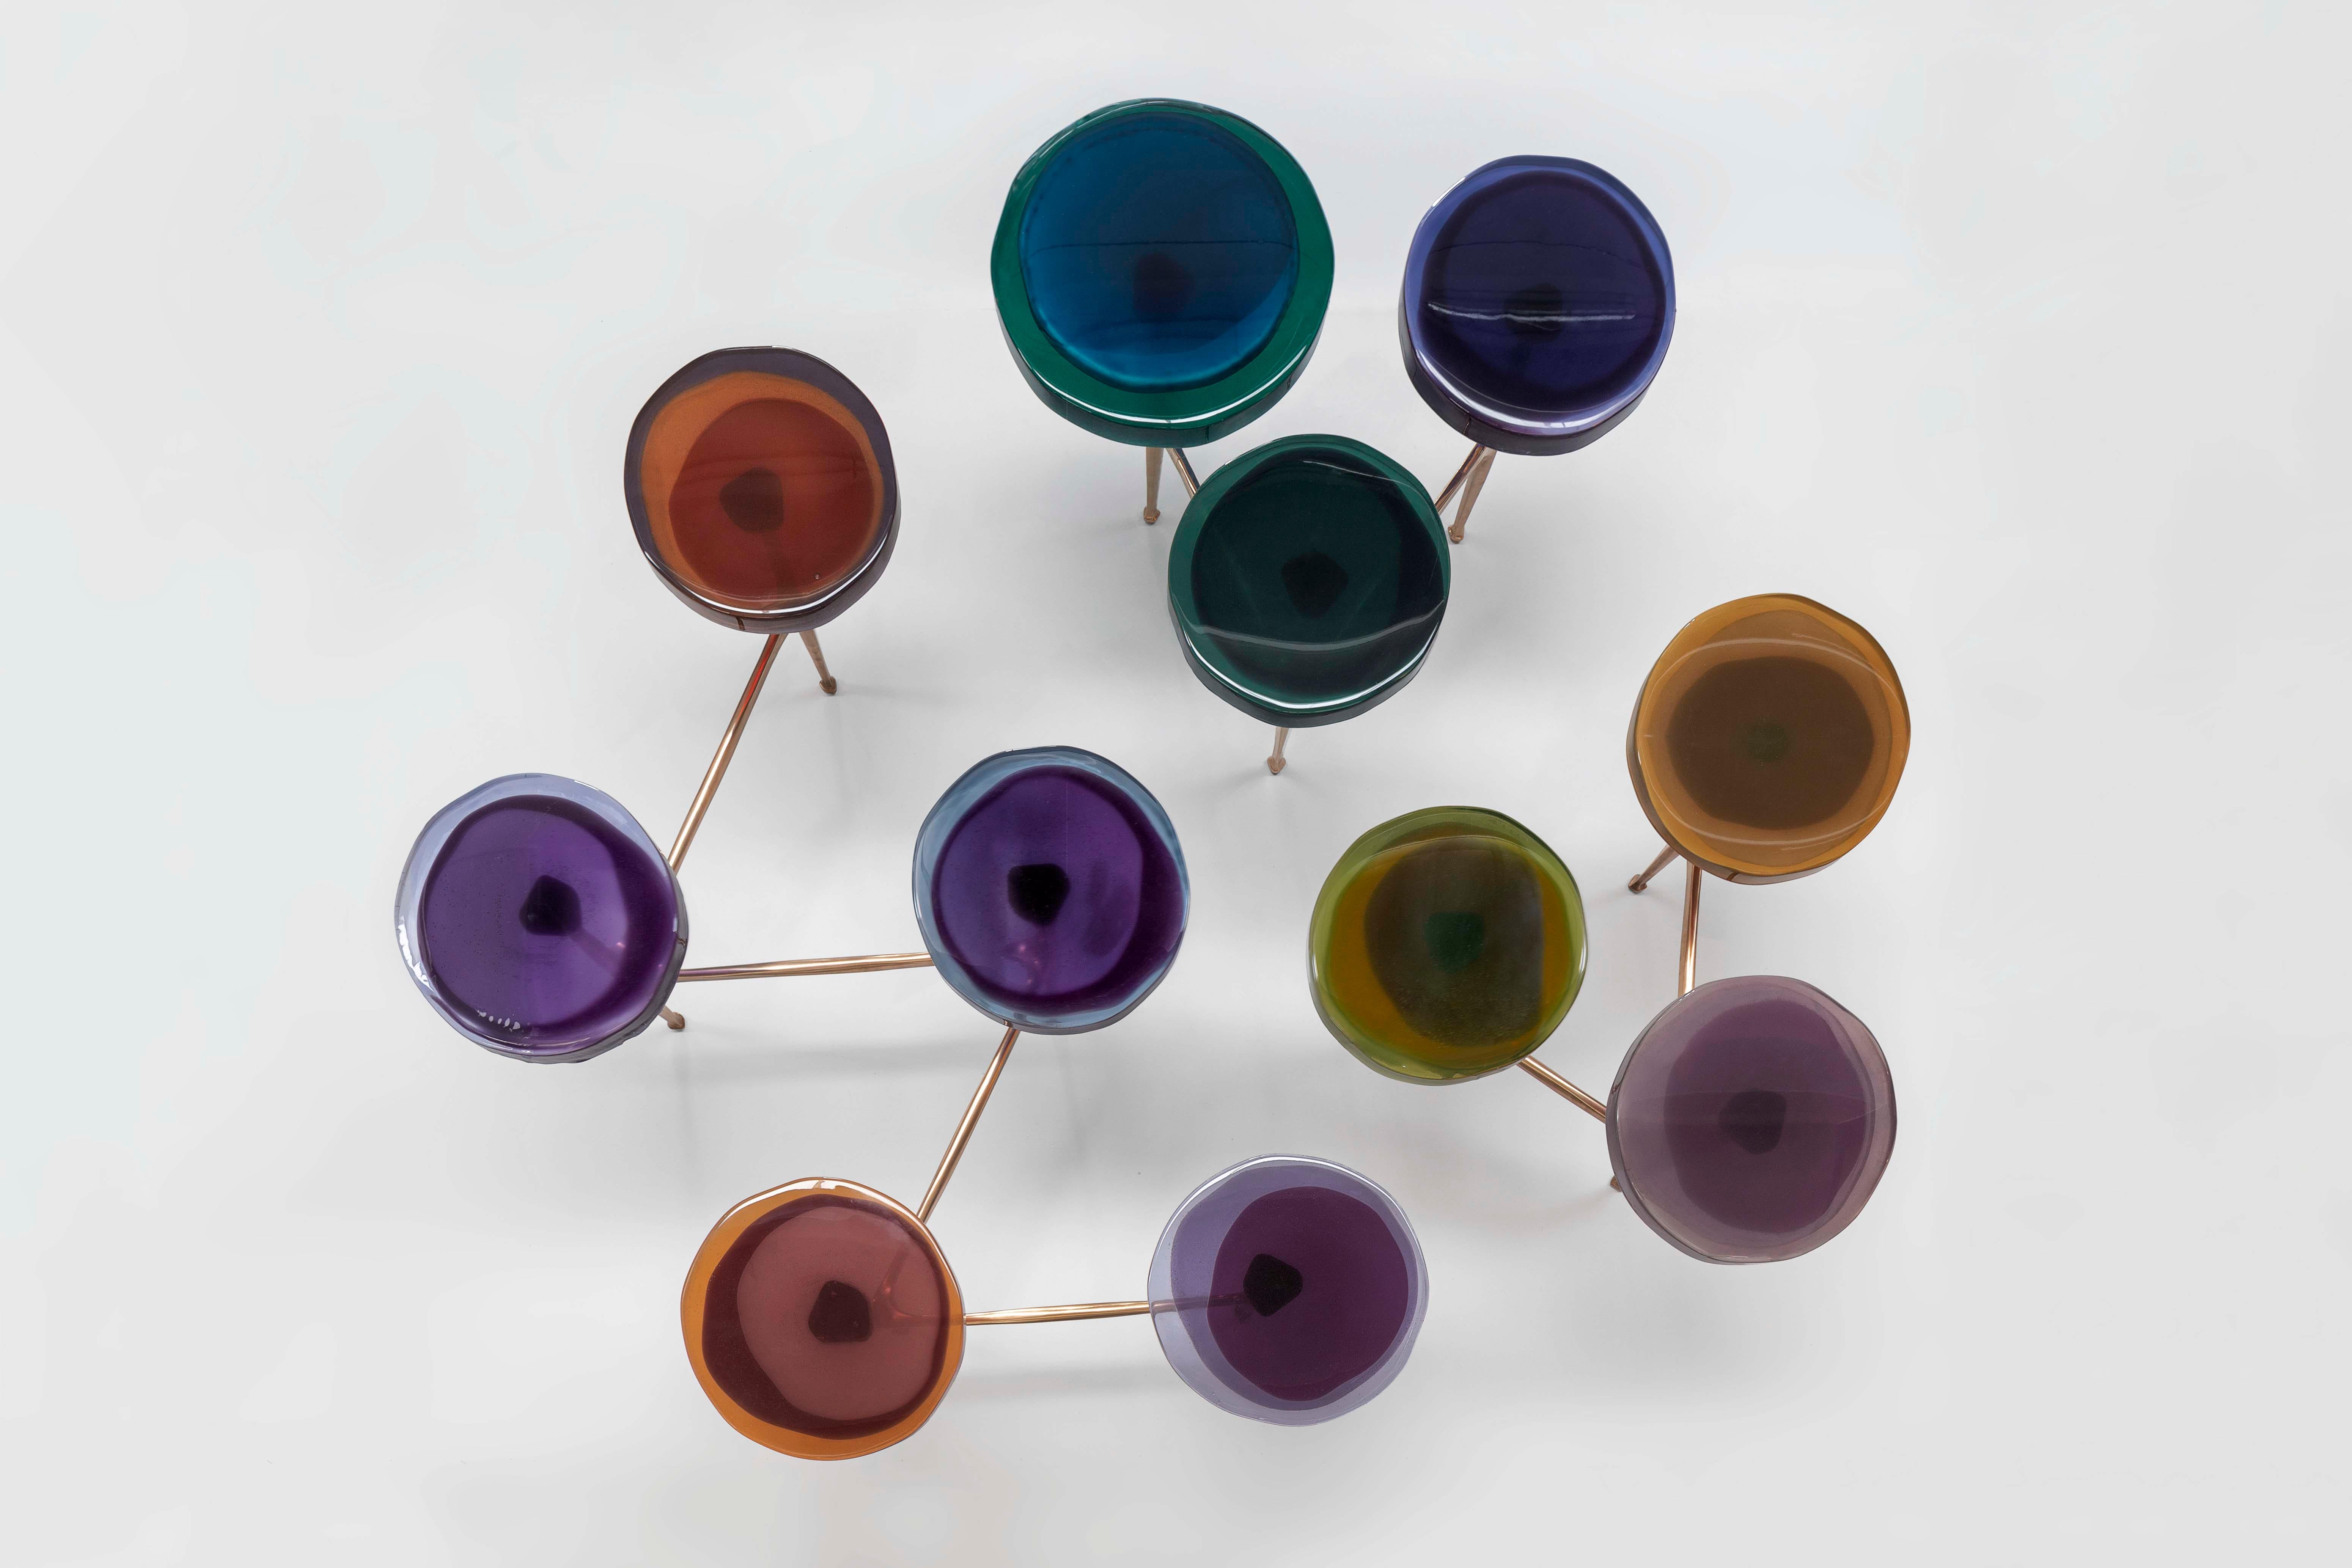 Boasting irregular circular tops made of transparent and colorful resin arranged in a staggered manner on a bronze frame, this organic table draws inspiration from clusters of wildflowers. Crafted using a specialized resin-casting technique, the